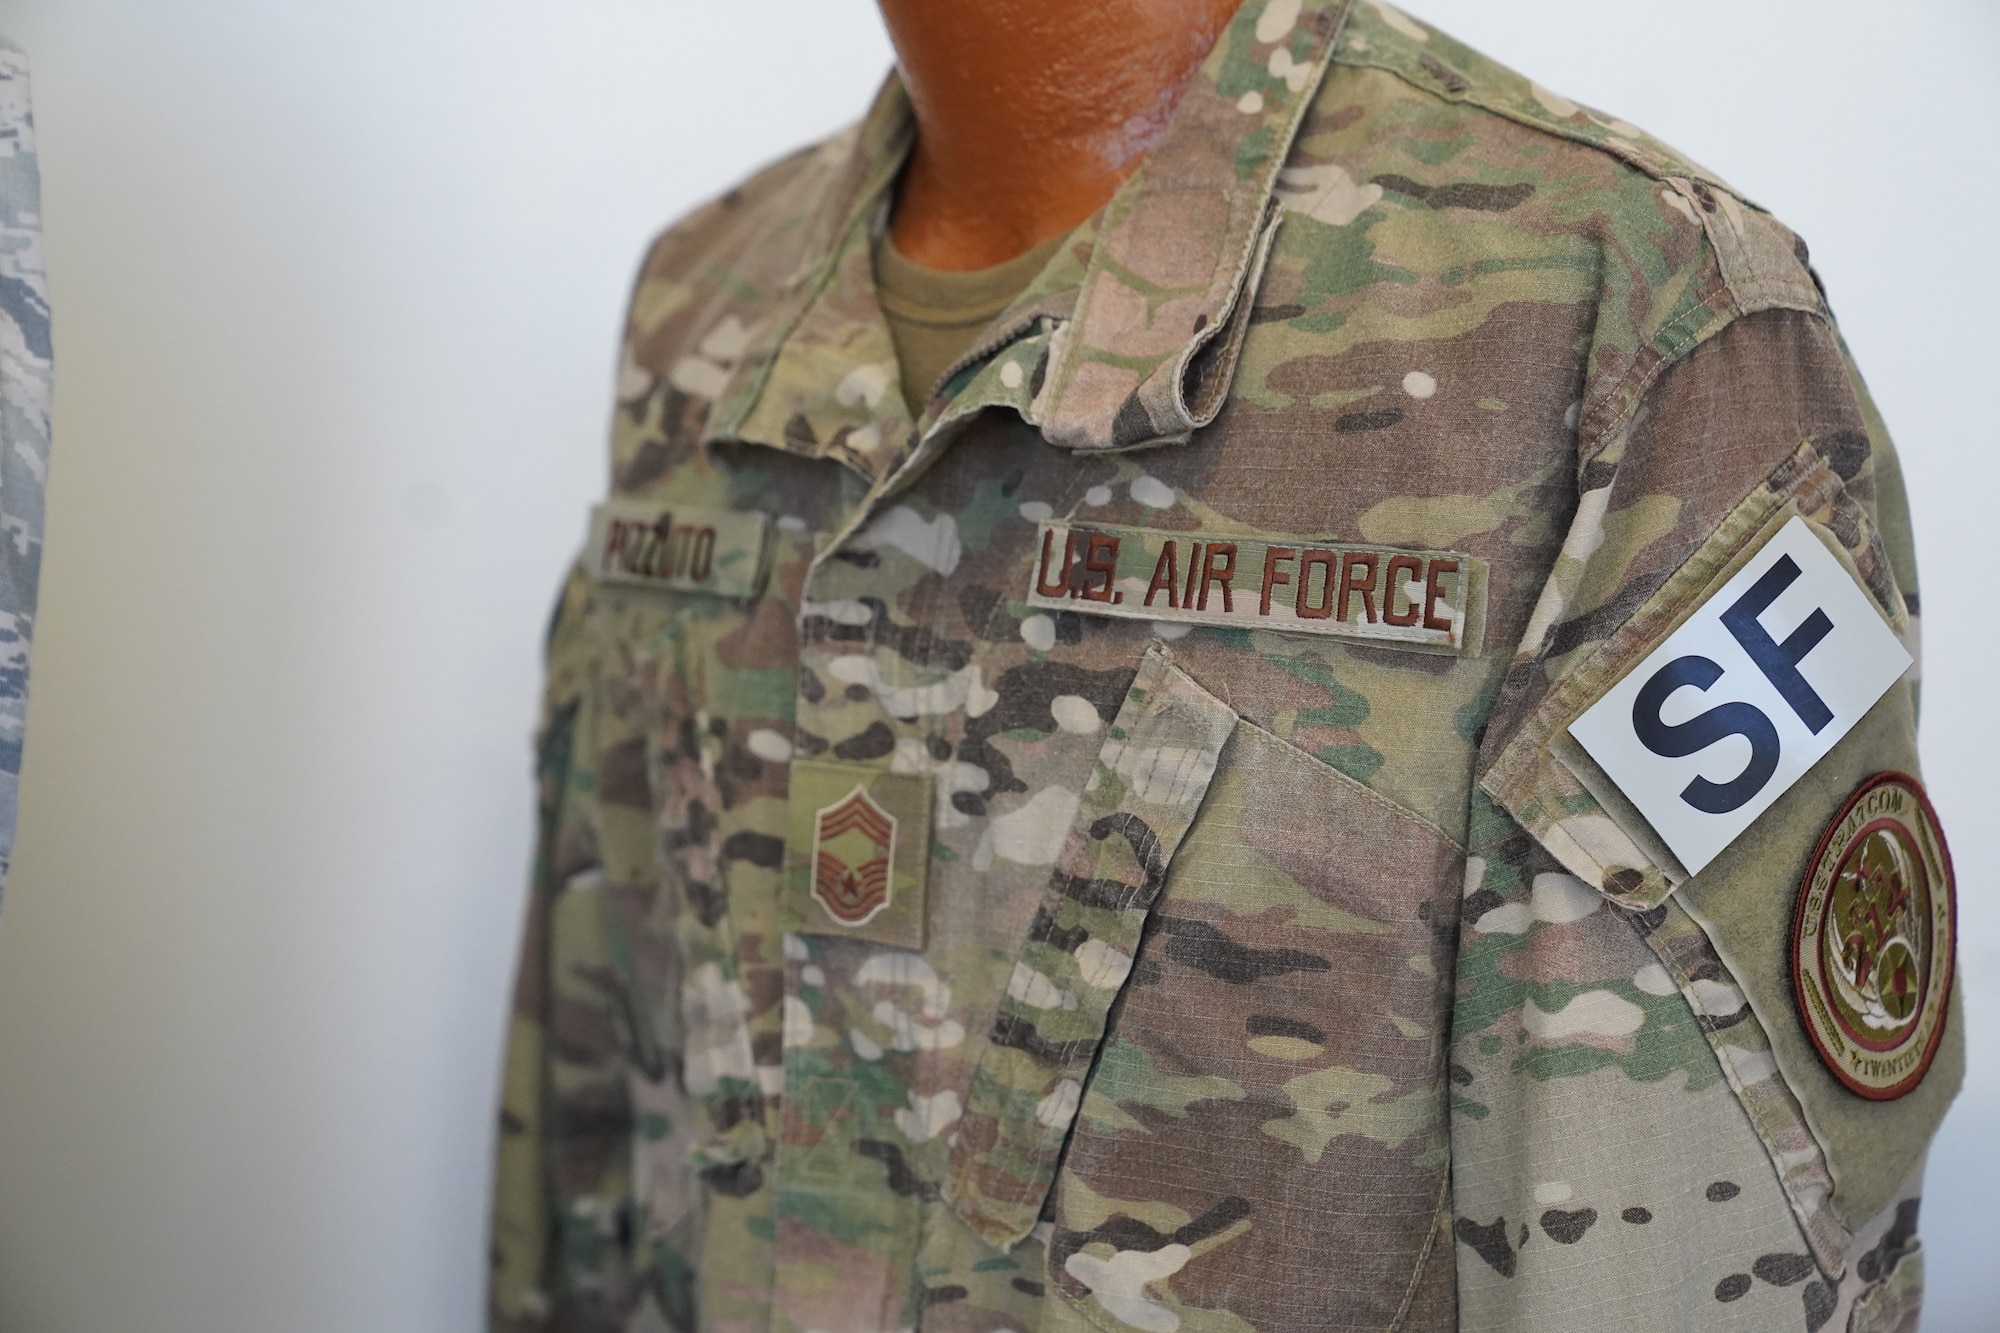 An Operational Camouflage Pattern uniform owned by Chief Master Sgt. David Pizzuto, 81st Training Wing command chief, is displayed inside of the Levitow Training Support Facility at Keesler Air Force Base, Mississippi, May 6, 2020. Pizzuto, who is slated to retire this month, has served for 37 years and has worn every uniform the Air Force has ever known. (U.S. Air Force photo by Airman 1st Class Spencer Tobler)